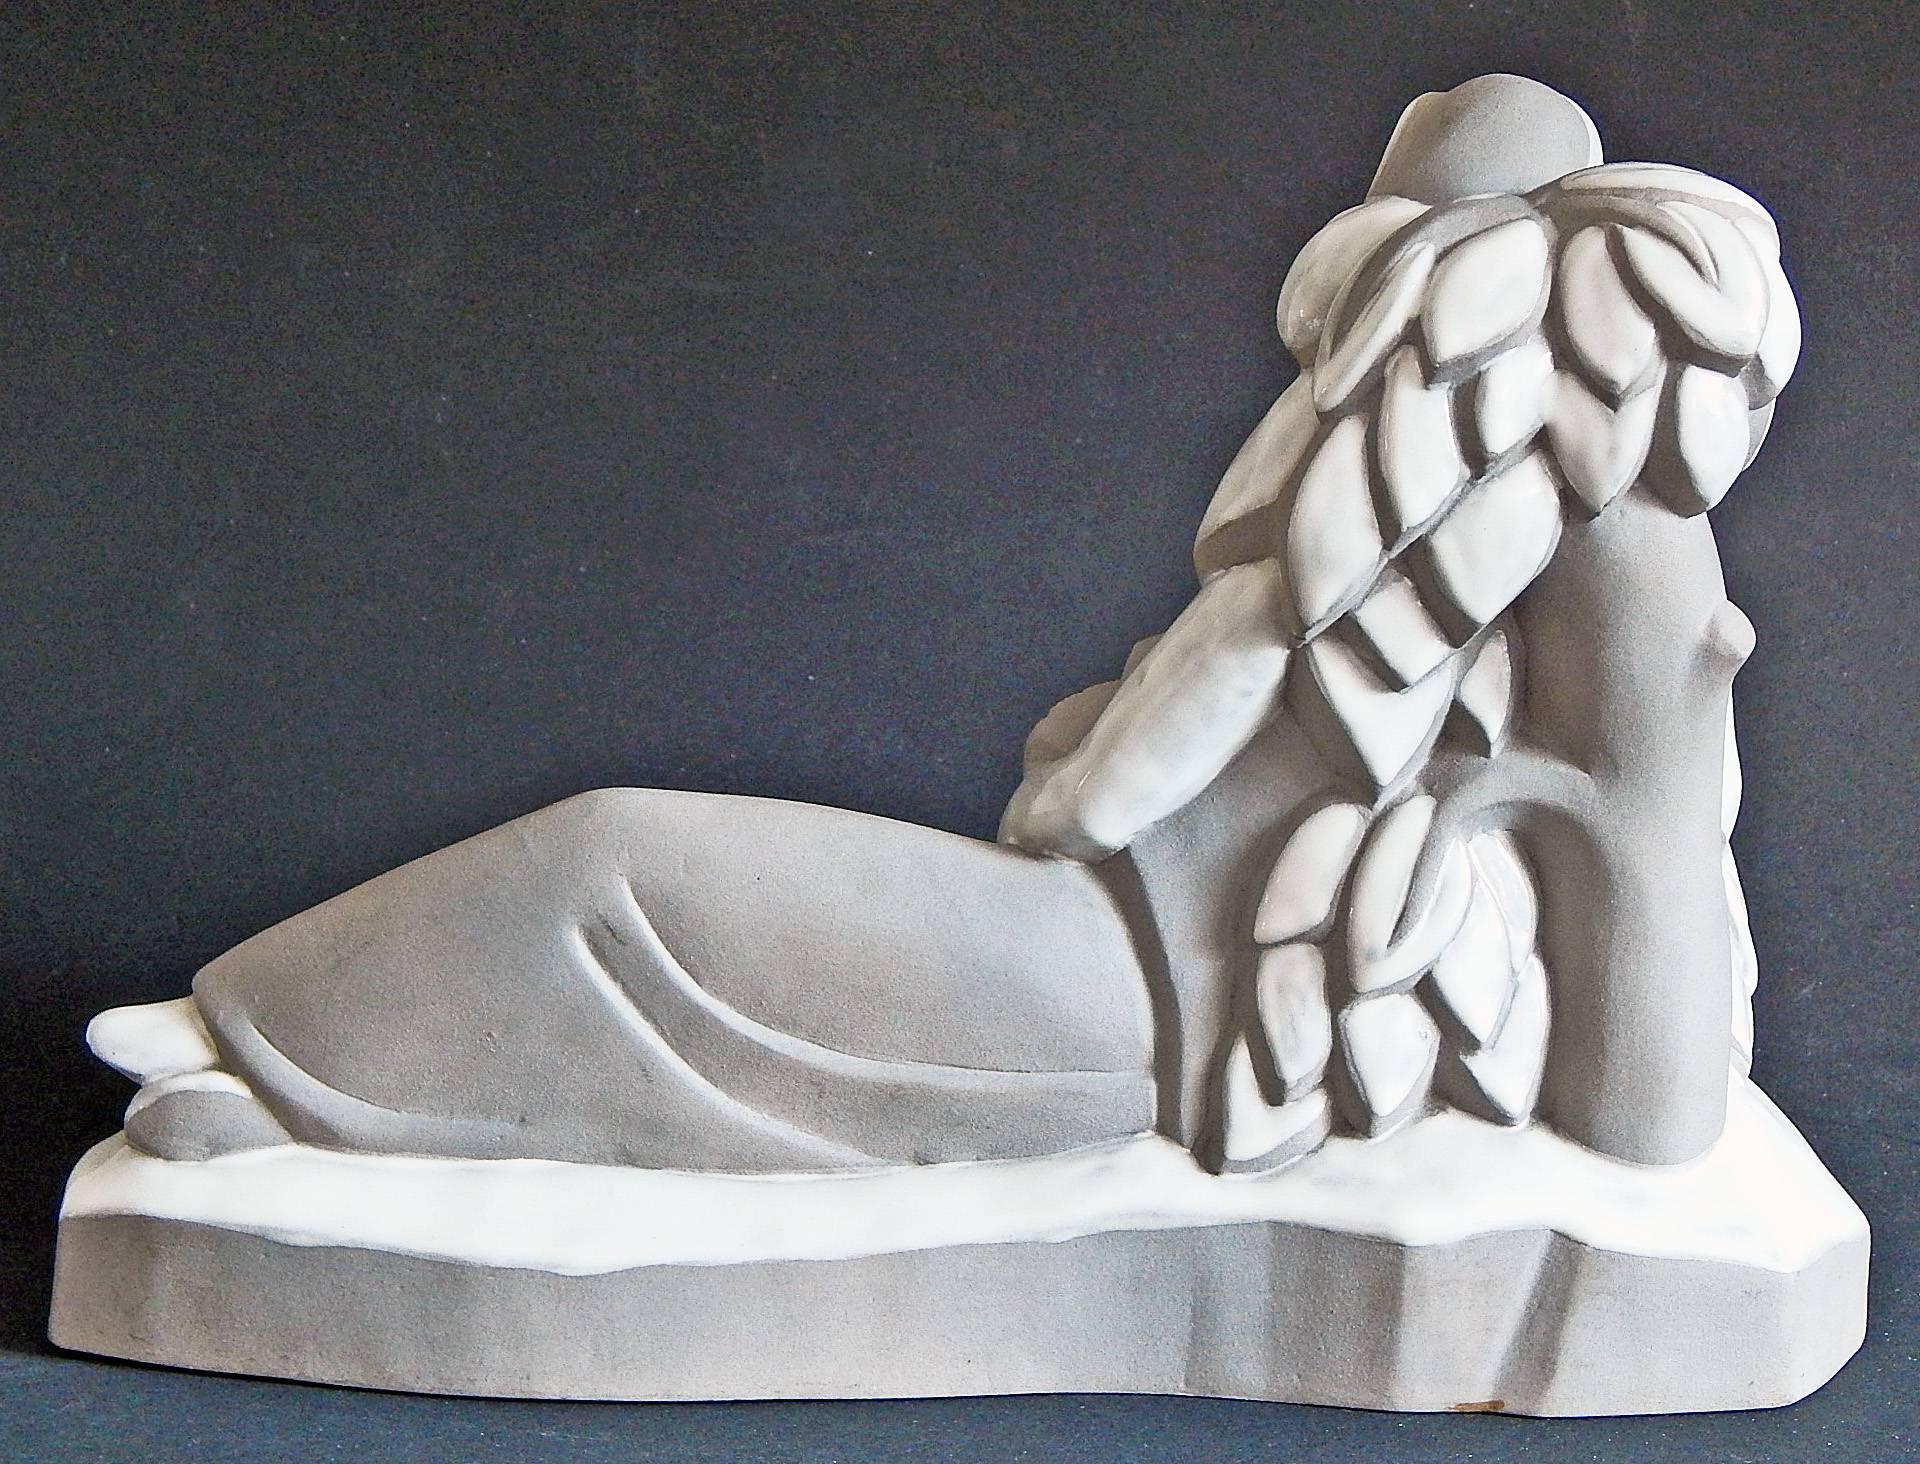 A striking example of the love of allegory among sculptors and painters in the Art Deco period, this rare piece depicts a stylized female figure holding a sheaf of wheat and scythe, resting from her labors for a moment in the fields. The sculptor